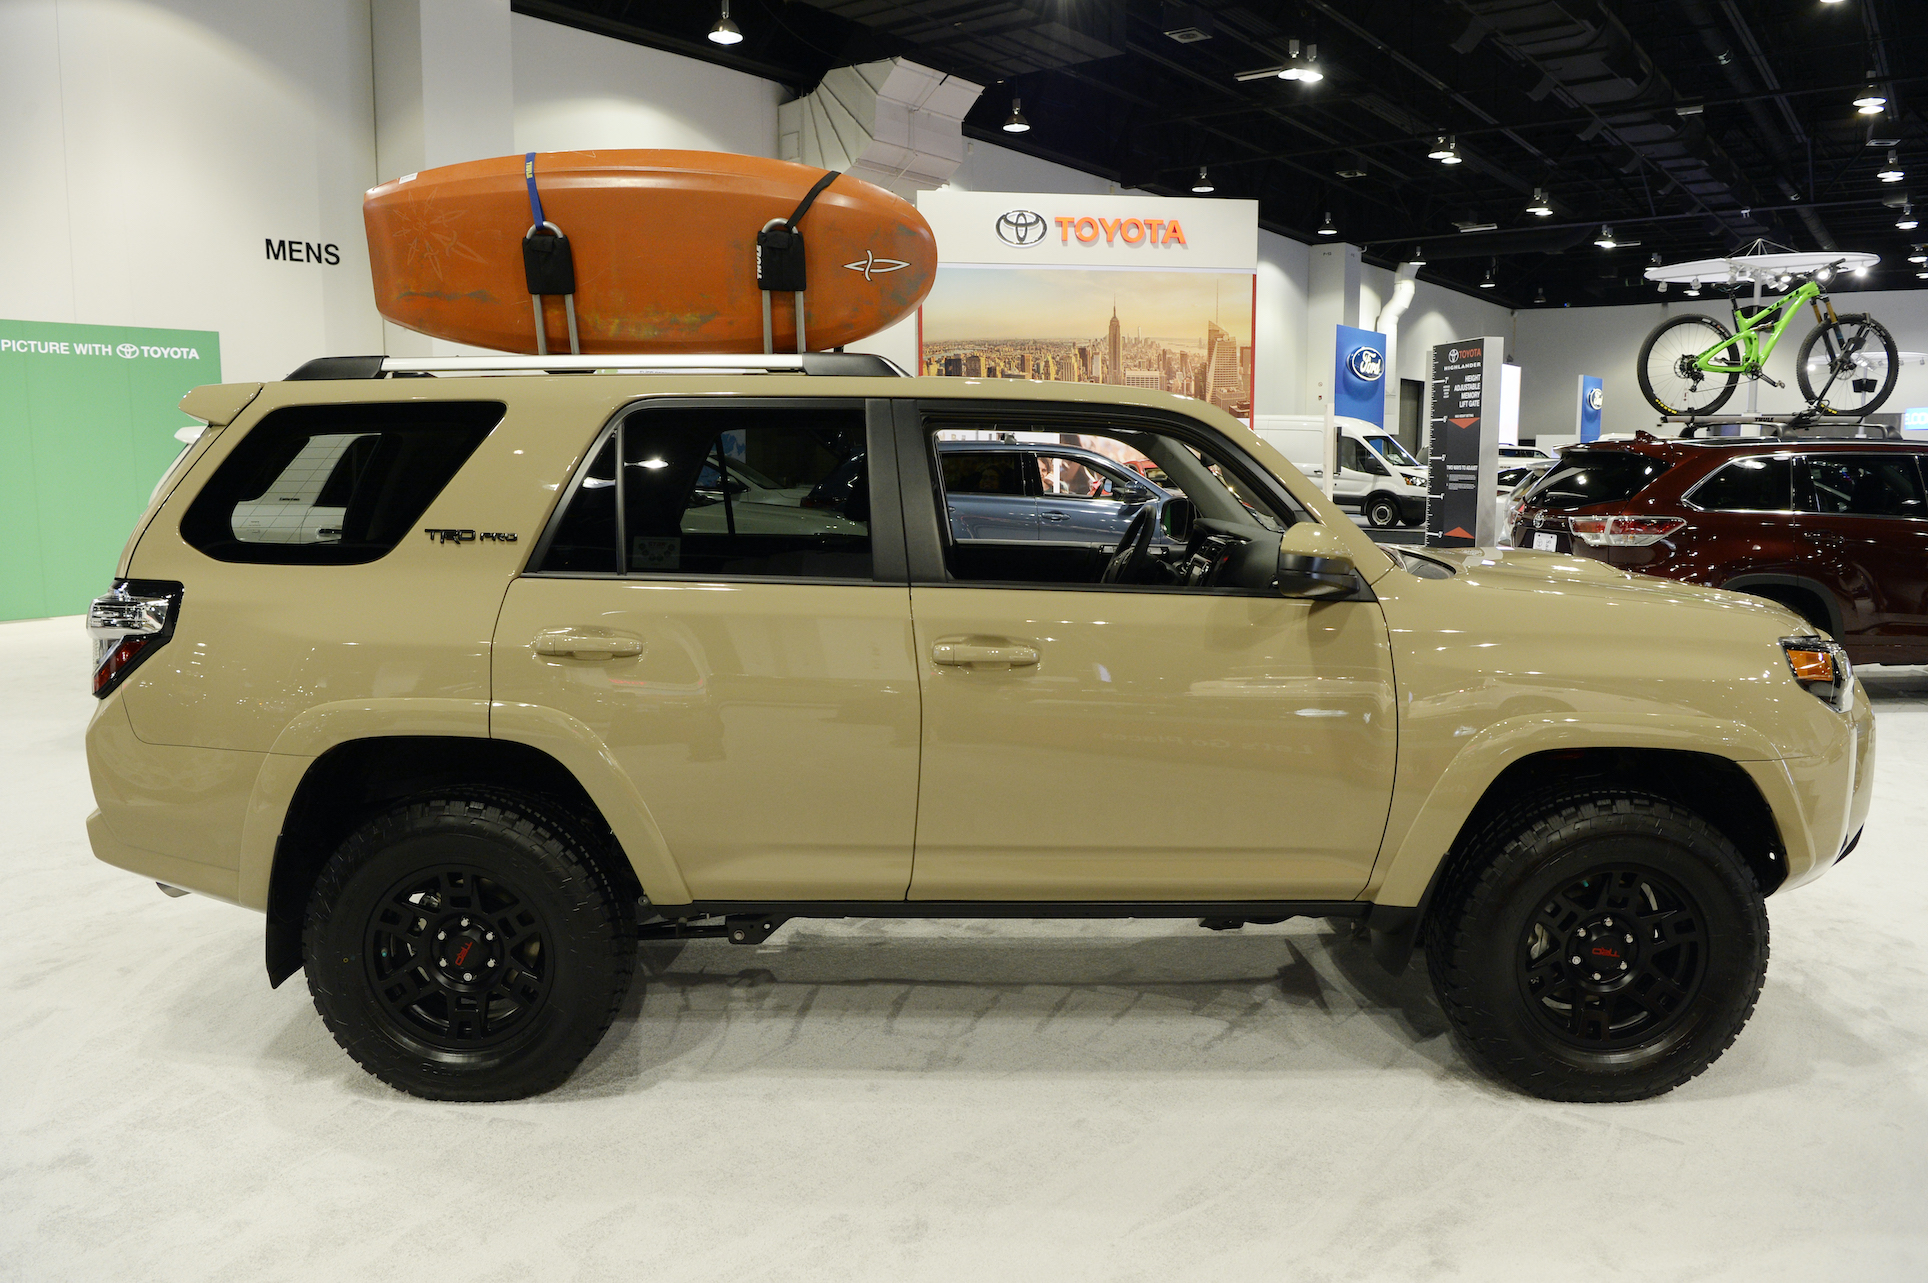 Toyota 4Runner TRD Pro on display at the Denver Auto Show at the Colorado Convention Center